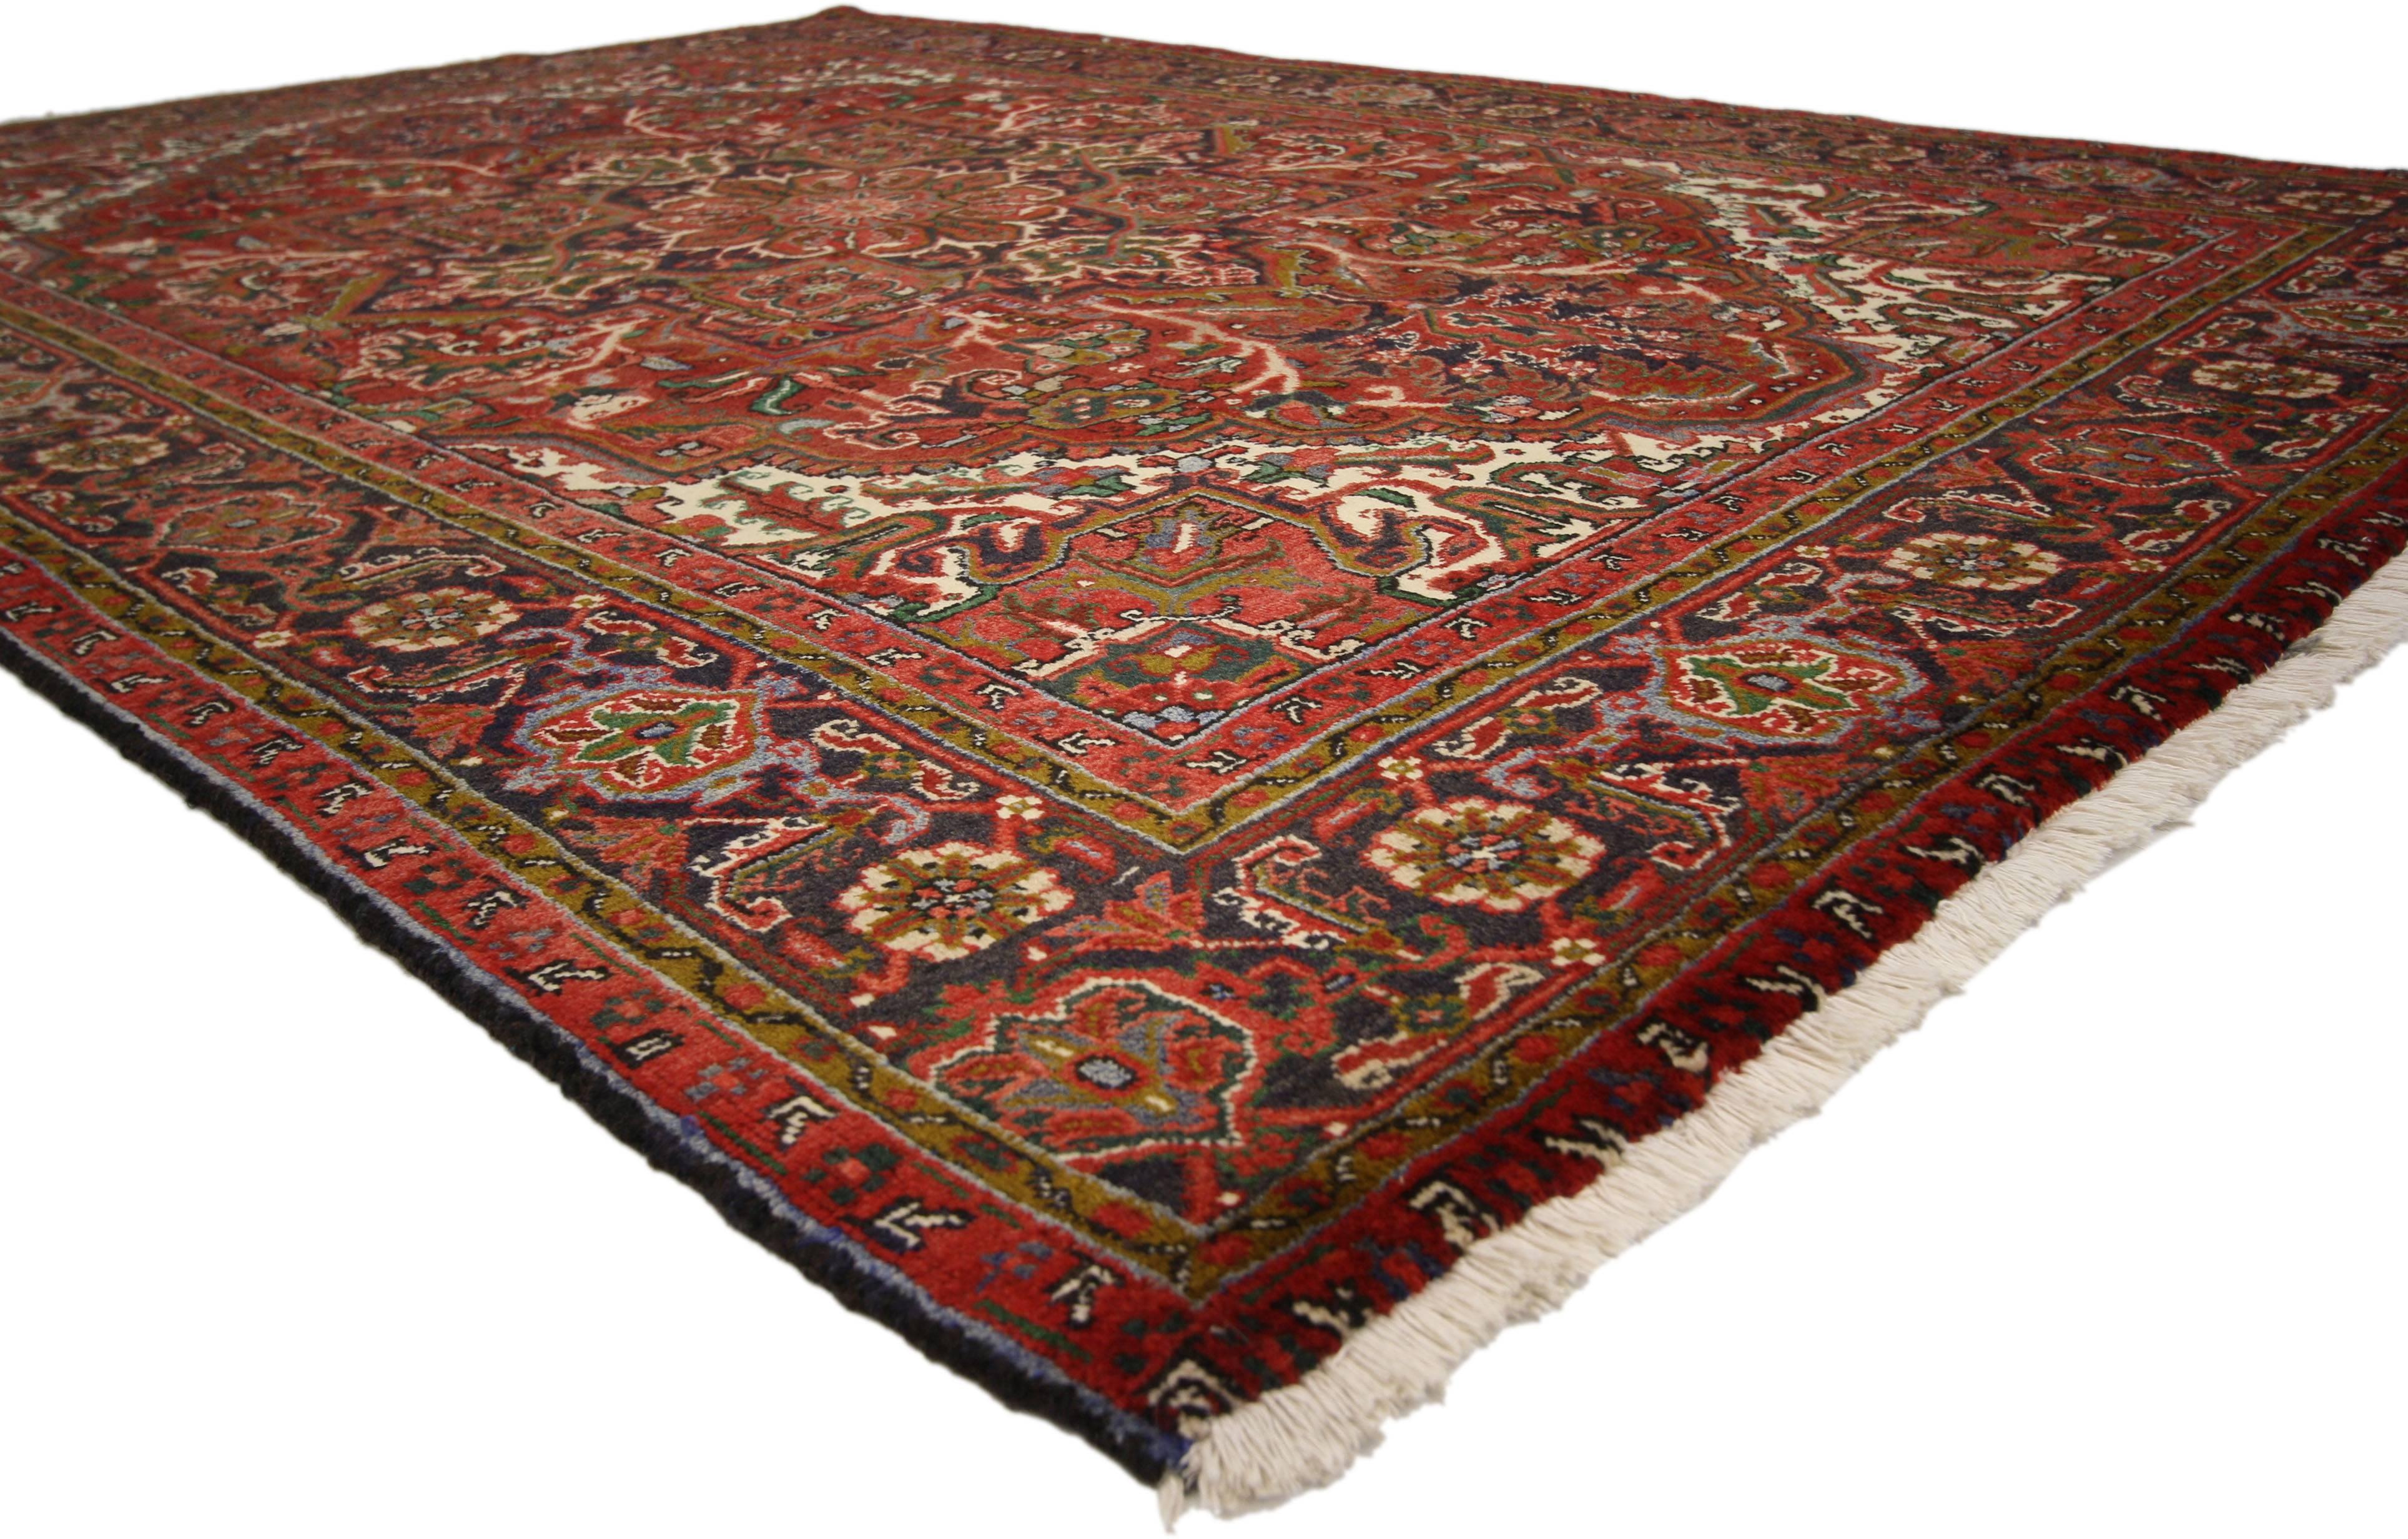 76165 vintage Persian Heriz rug with Traditional English Tudor Manor House style 06'10 x 09'08. Full of character and stately presence, this vintage Persian Heriz rug features classical elements of Persian rug design and Mid-Century Modern style.